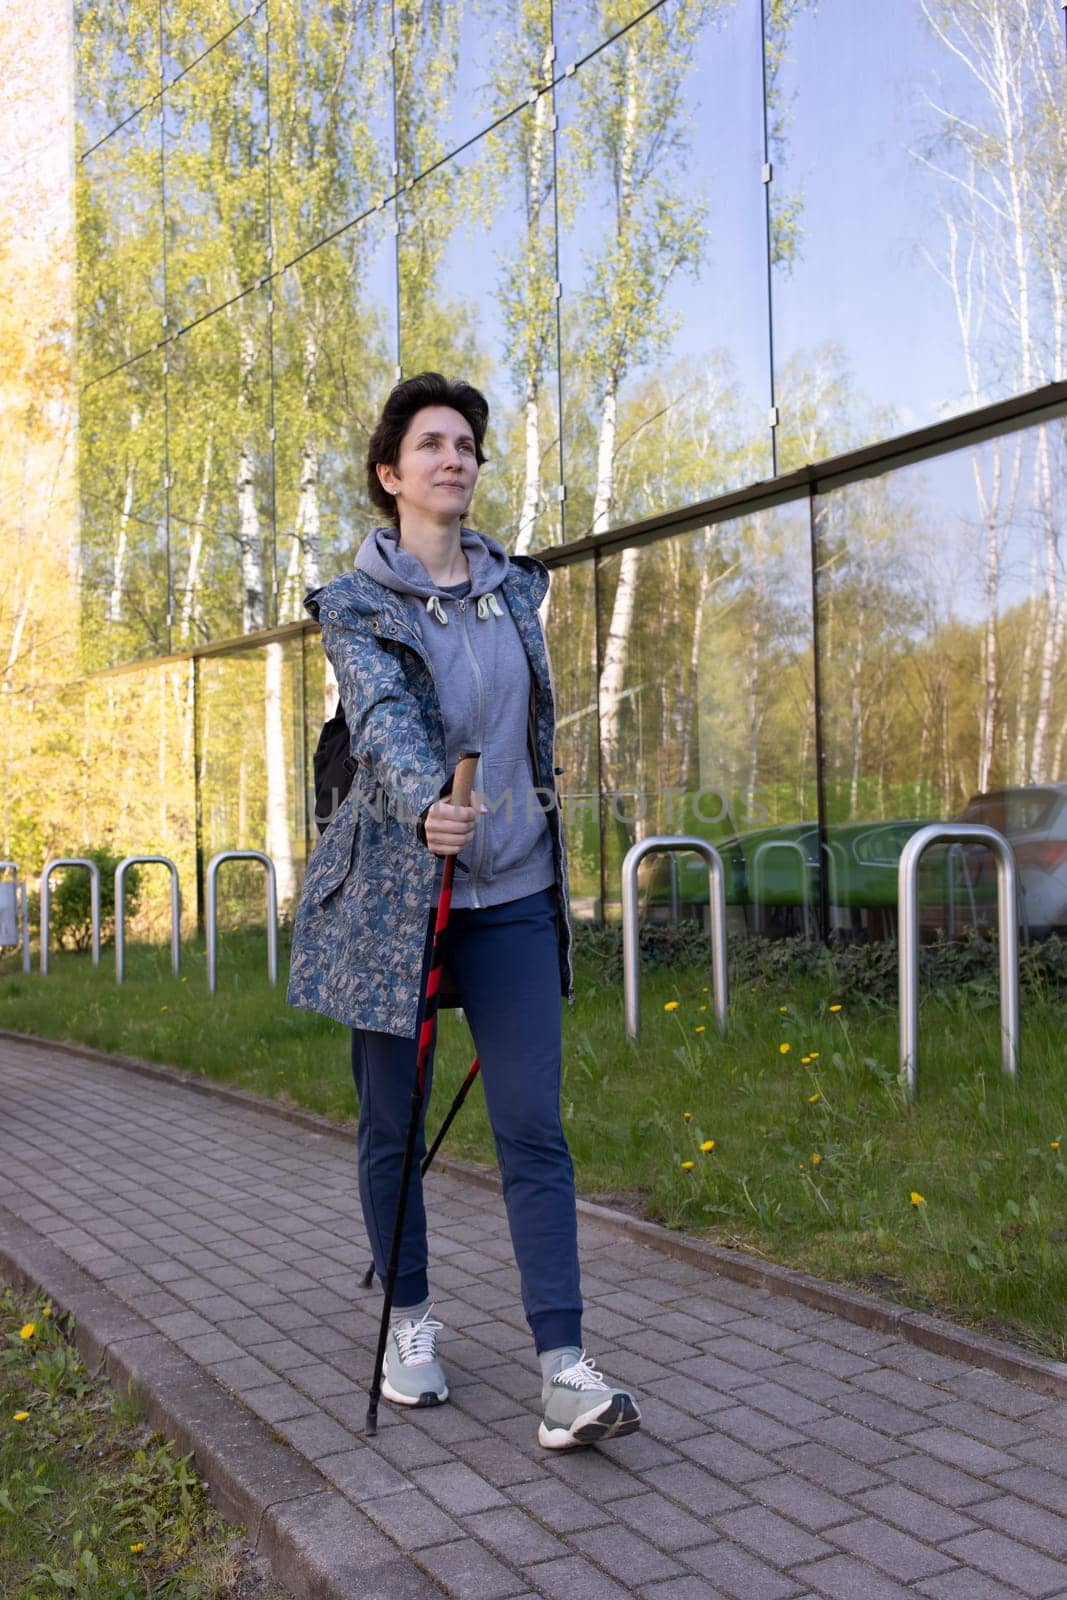 Nordic Walking In Urban City. Beautiful Happy Caucasian Woman Training With Sticks Outdoor, Modern Glass Eco Building on Background. Physical Activity With Walking Poles, Recreation. Vertical Plane.